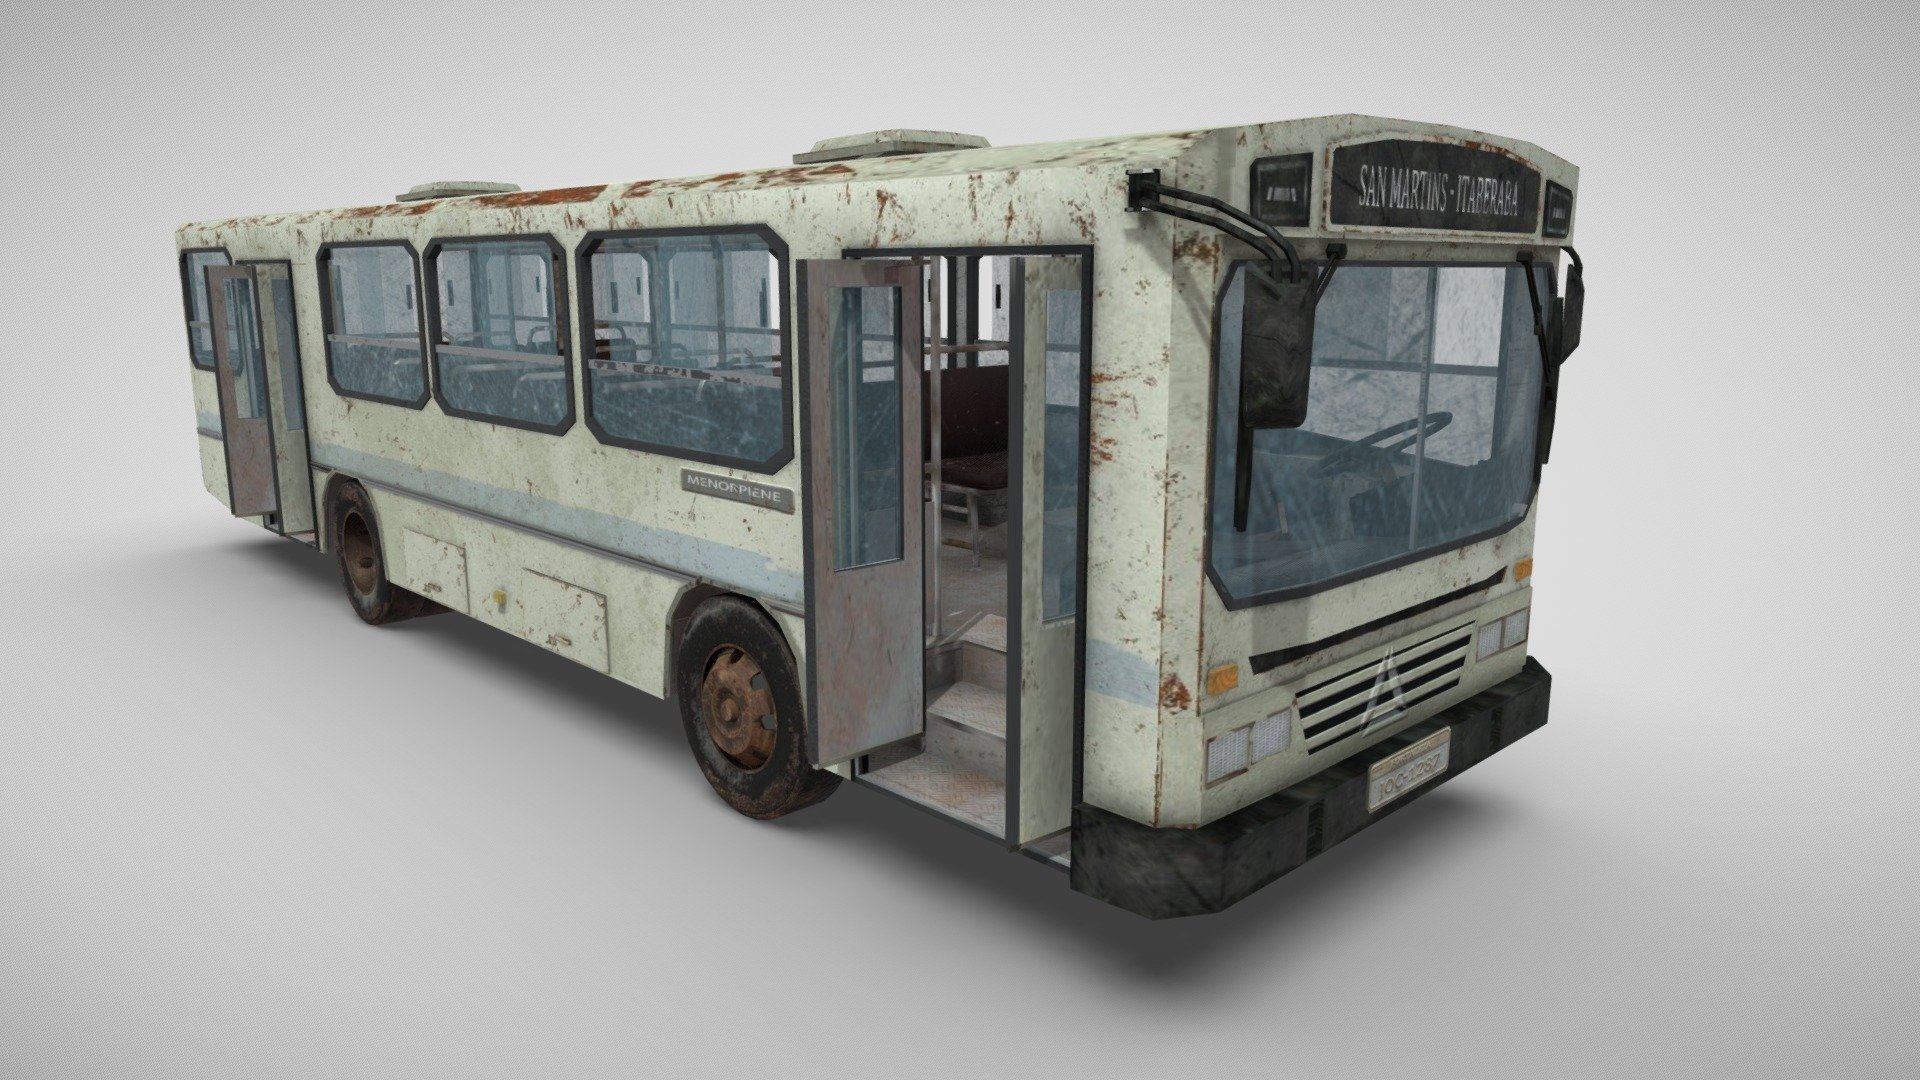 Features:

Low poly
Game ready.
Optimized.
Grouped and nomed parts.
Easy to modify.
All formts tested and working.
Textures included and materials applied.
Textures PBR MetalRough 2048x2048.
No plugins required 3d model